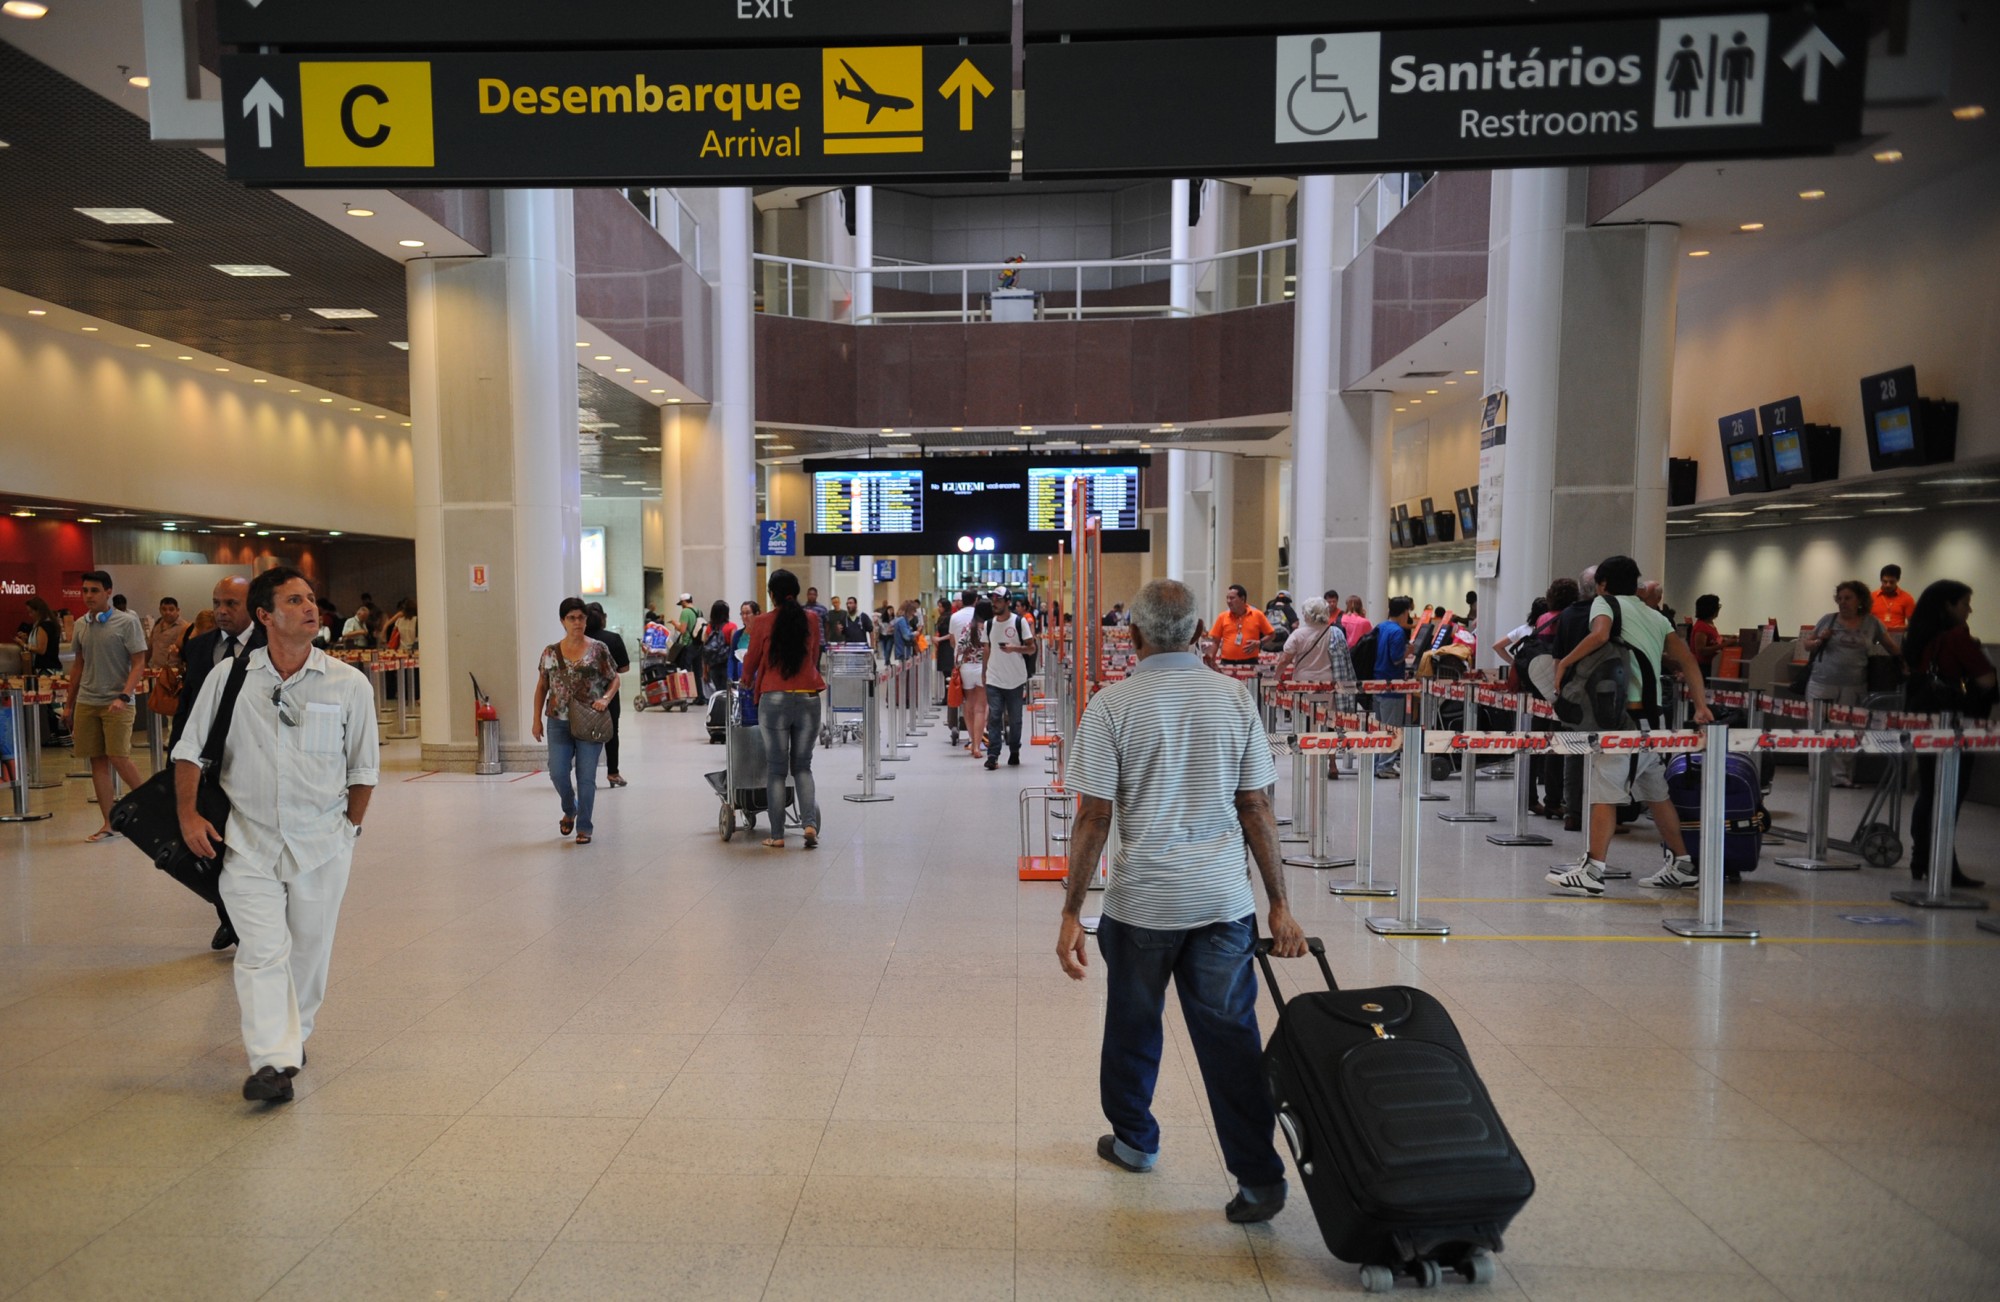 Brazilians Reduce Spending While Traveling Abroad